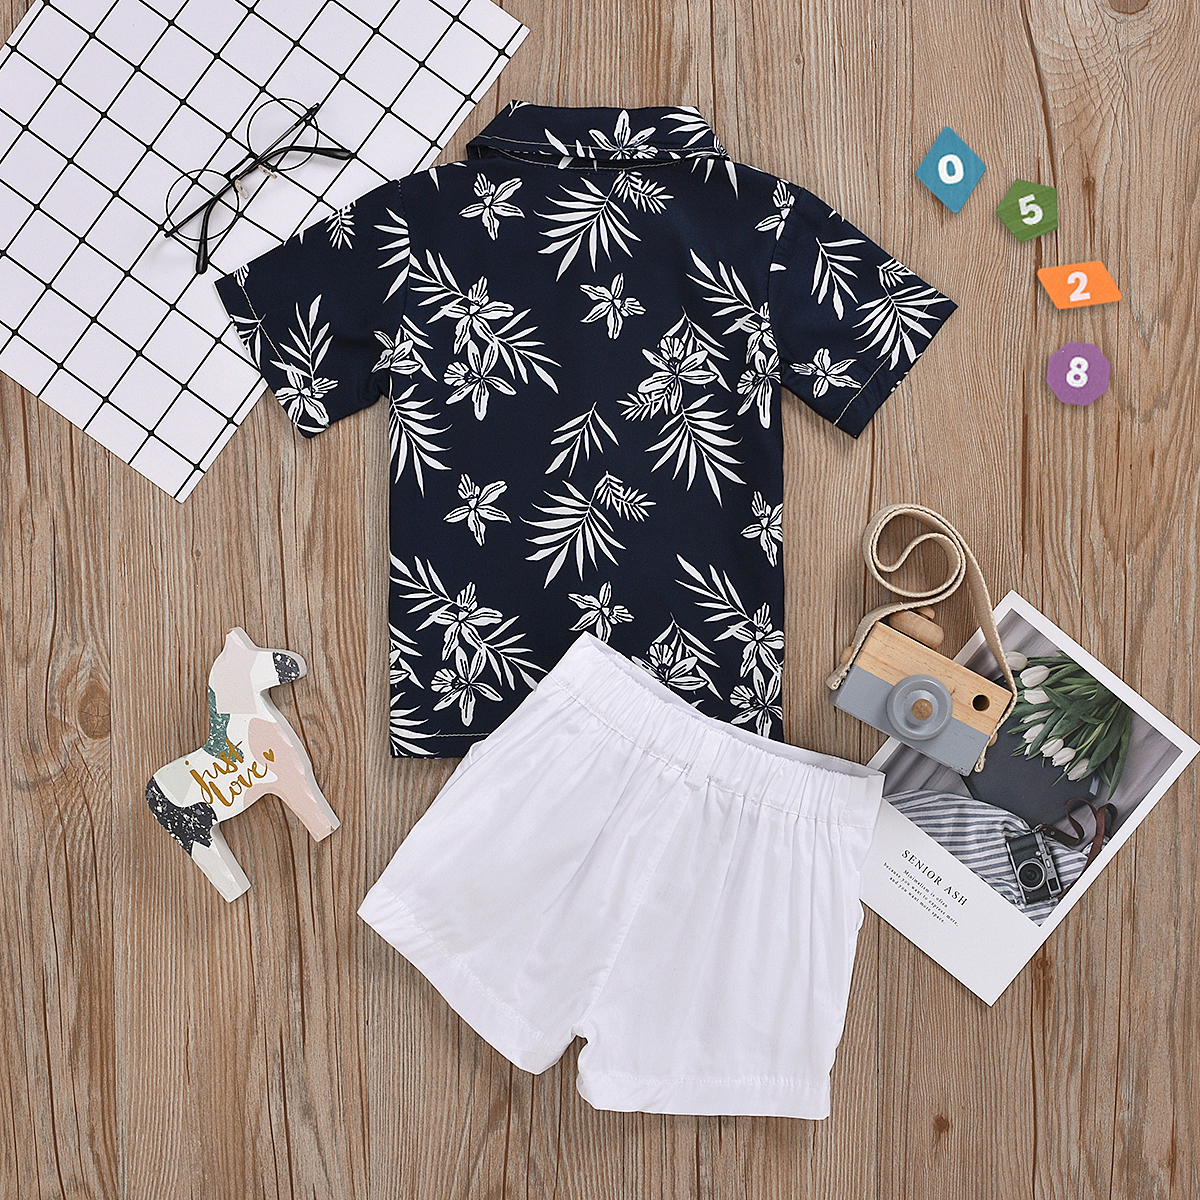 2020 Summer Infant Baby Boys Clothes Sets Print Short Sleeve Shirts Tops+Shorts Trousers Beach Sets